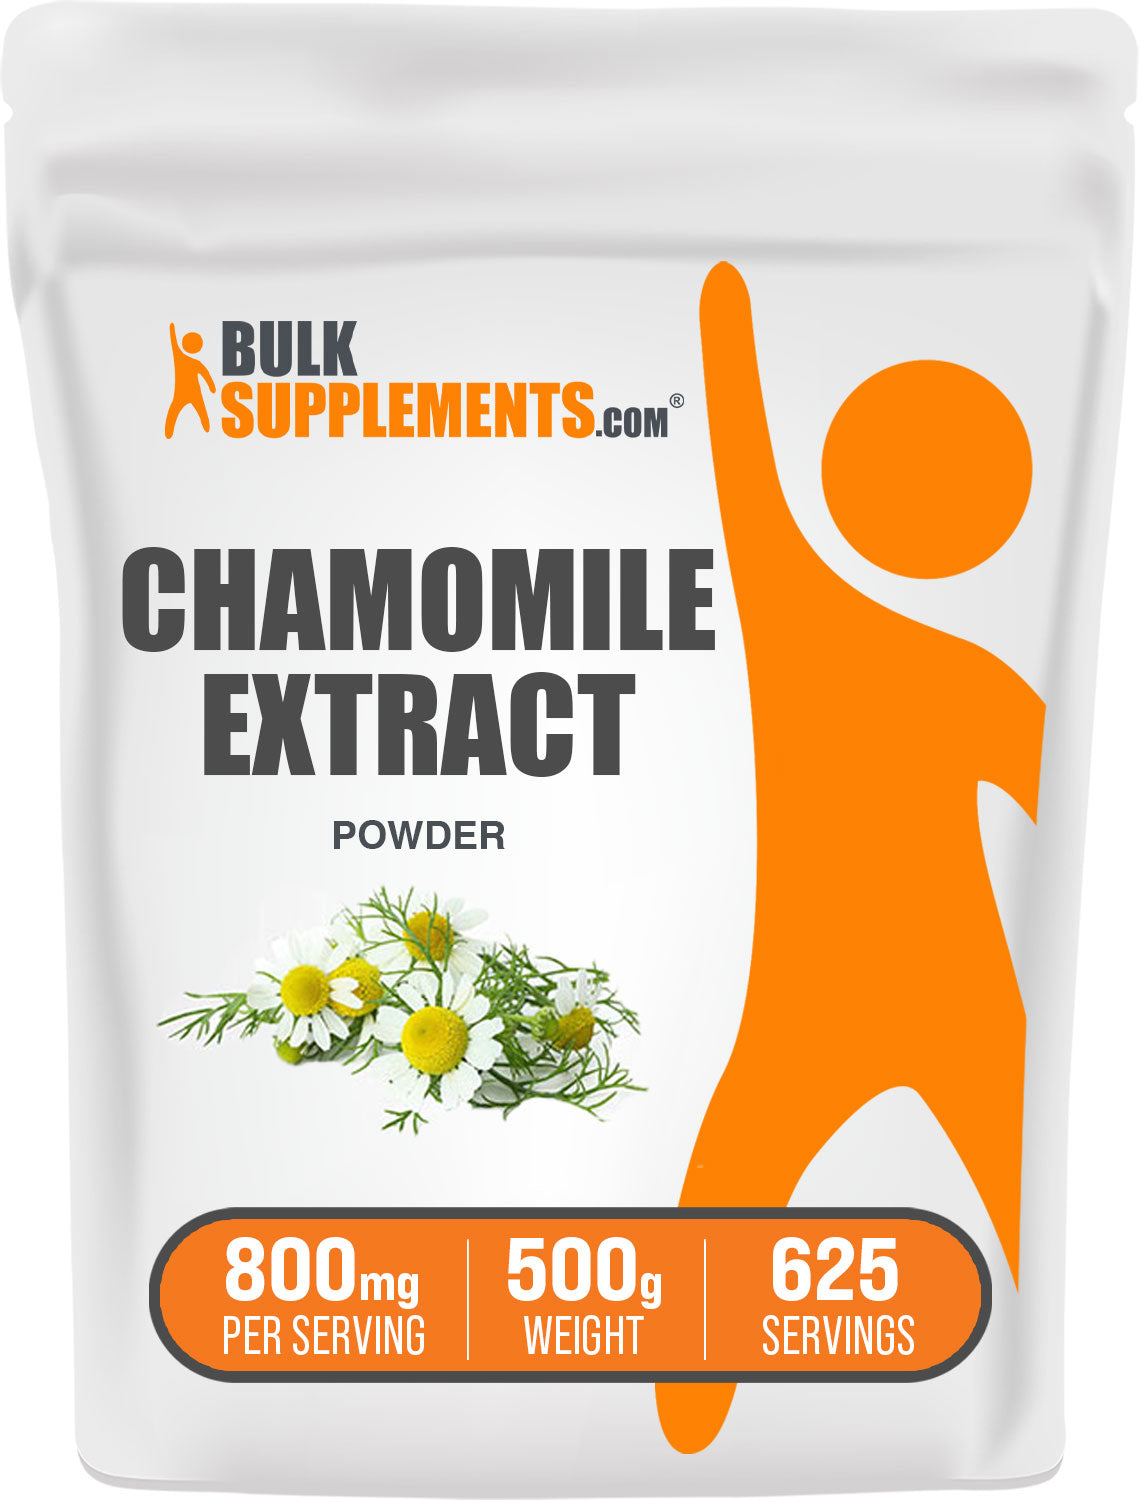 500g of chamomile extract